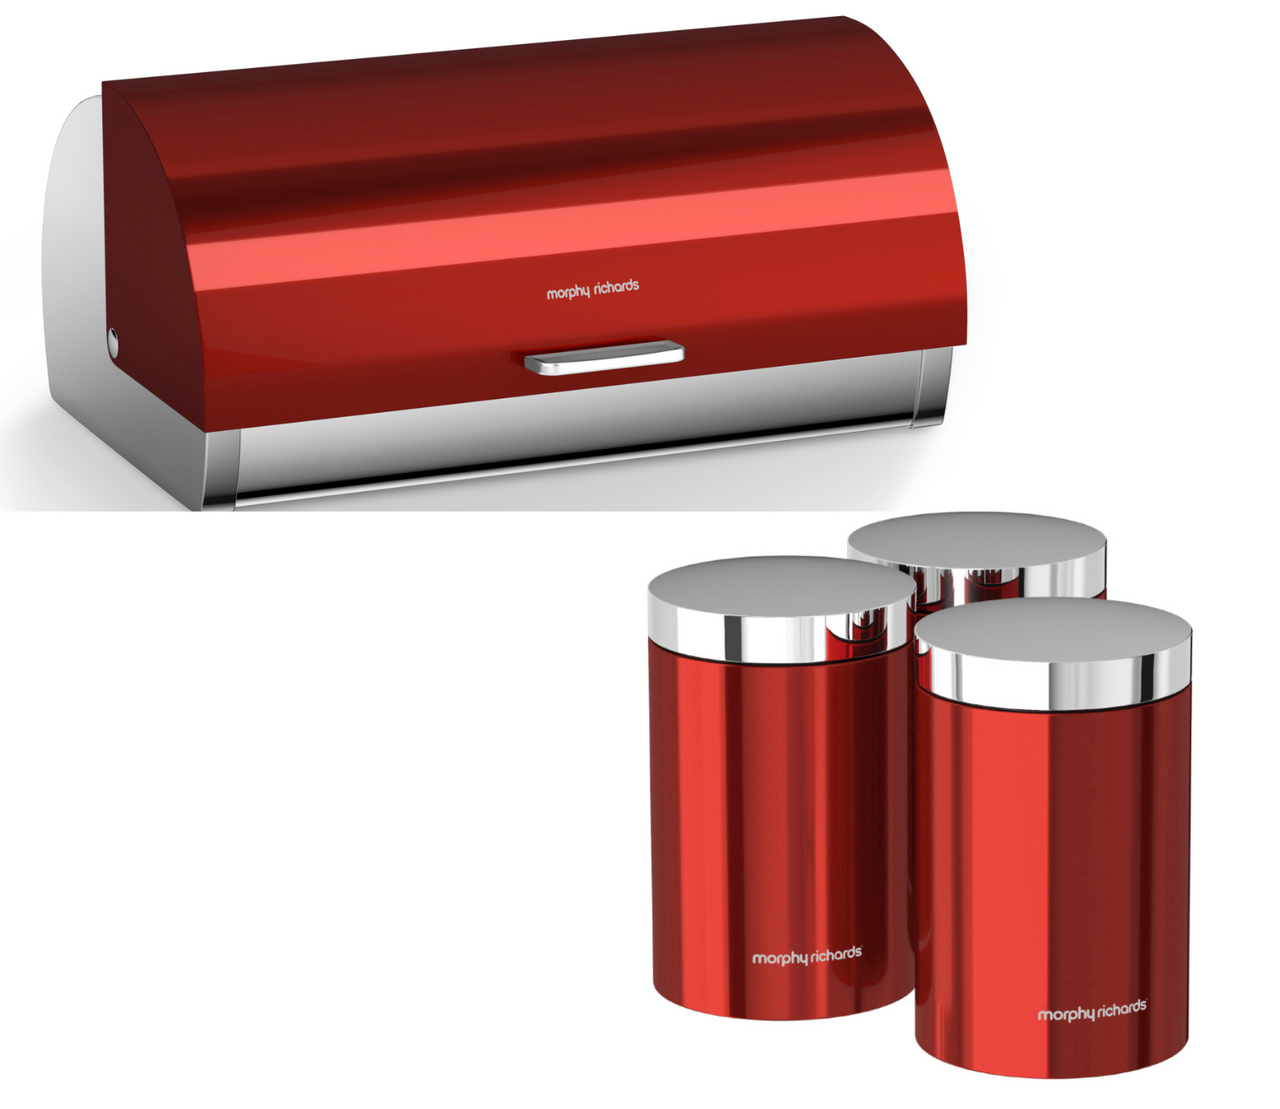 Morphy Richards Accents Red Bread Bin Canisters Matching Stainless Steel Kitchen Storage Set